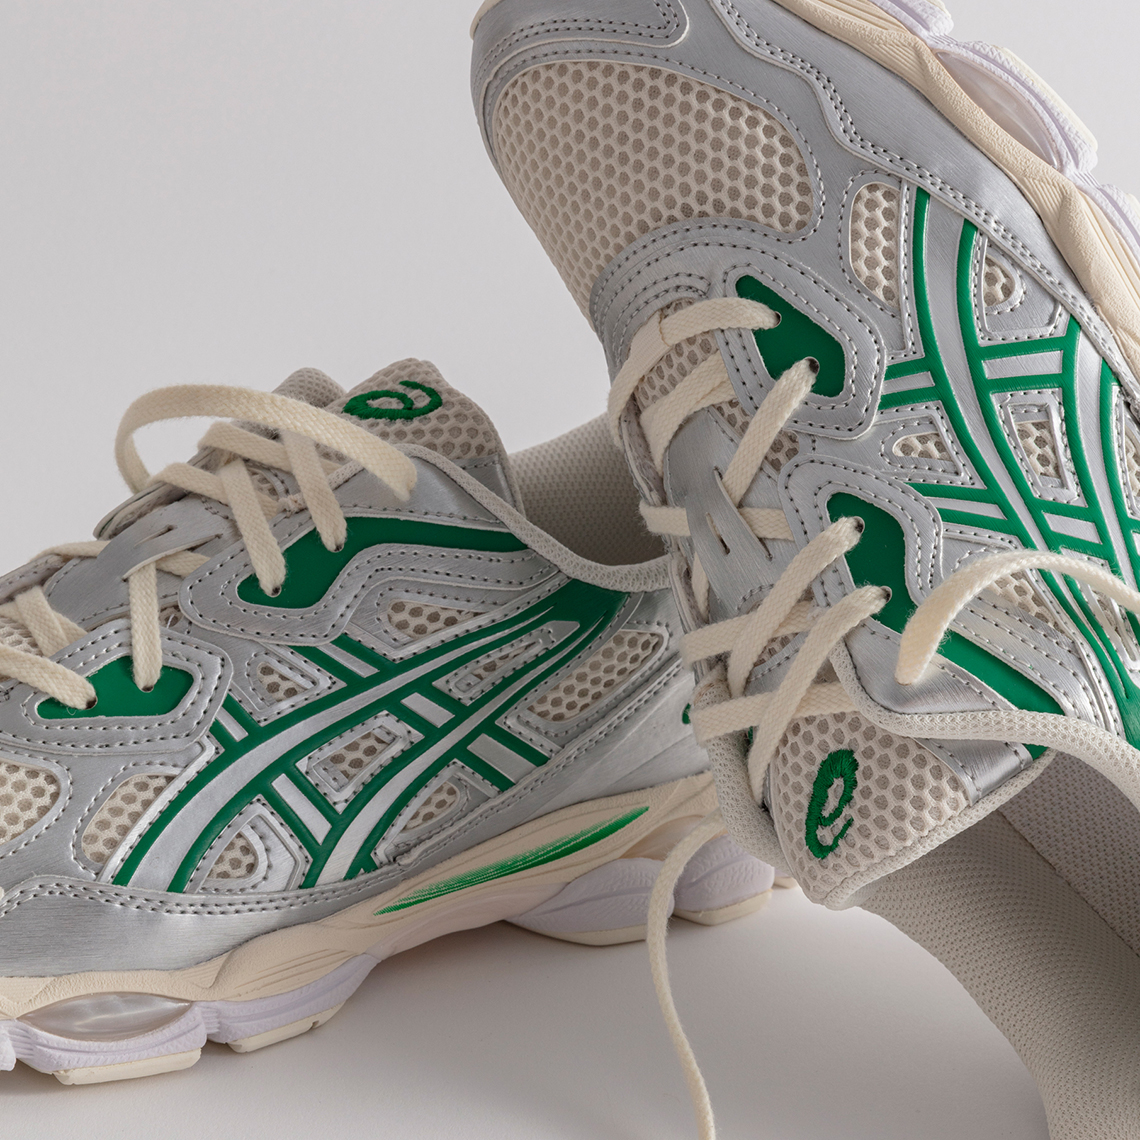 Example of a max-cushioned Asics shoe MetaSpeed Sky